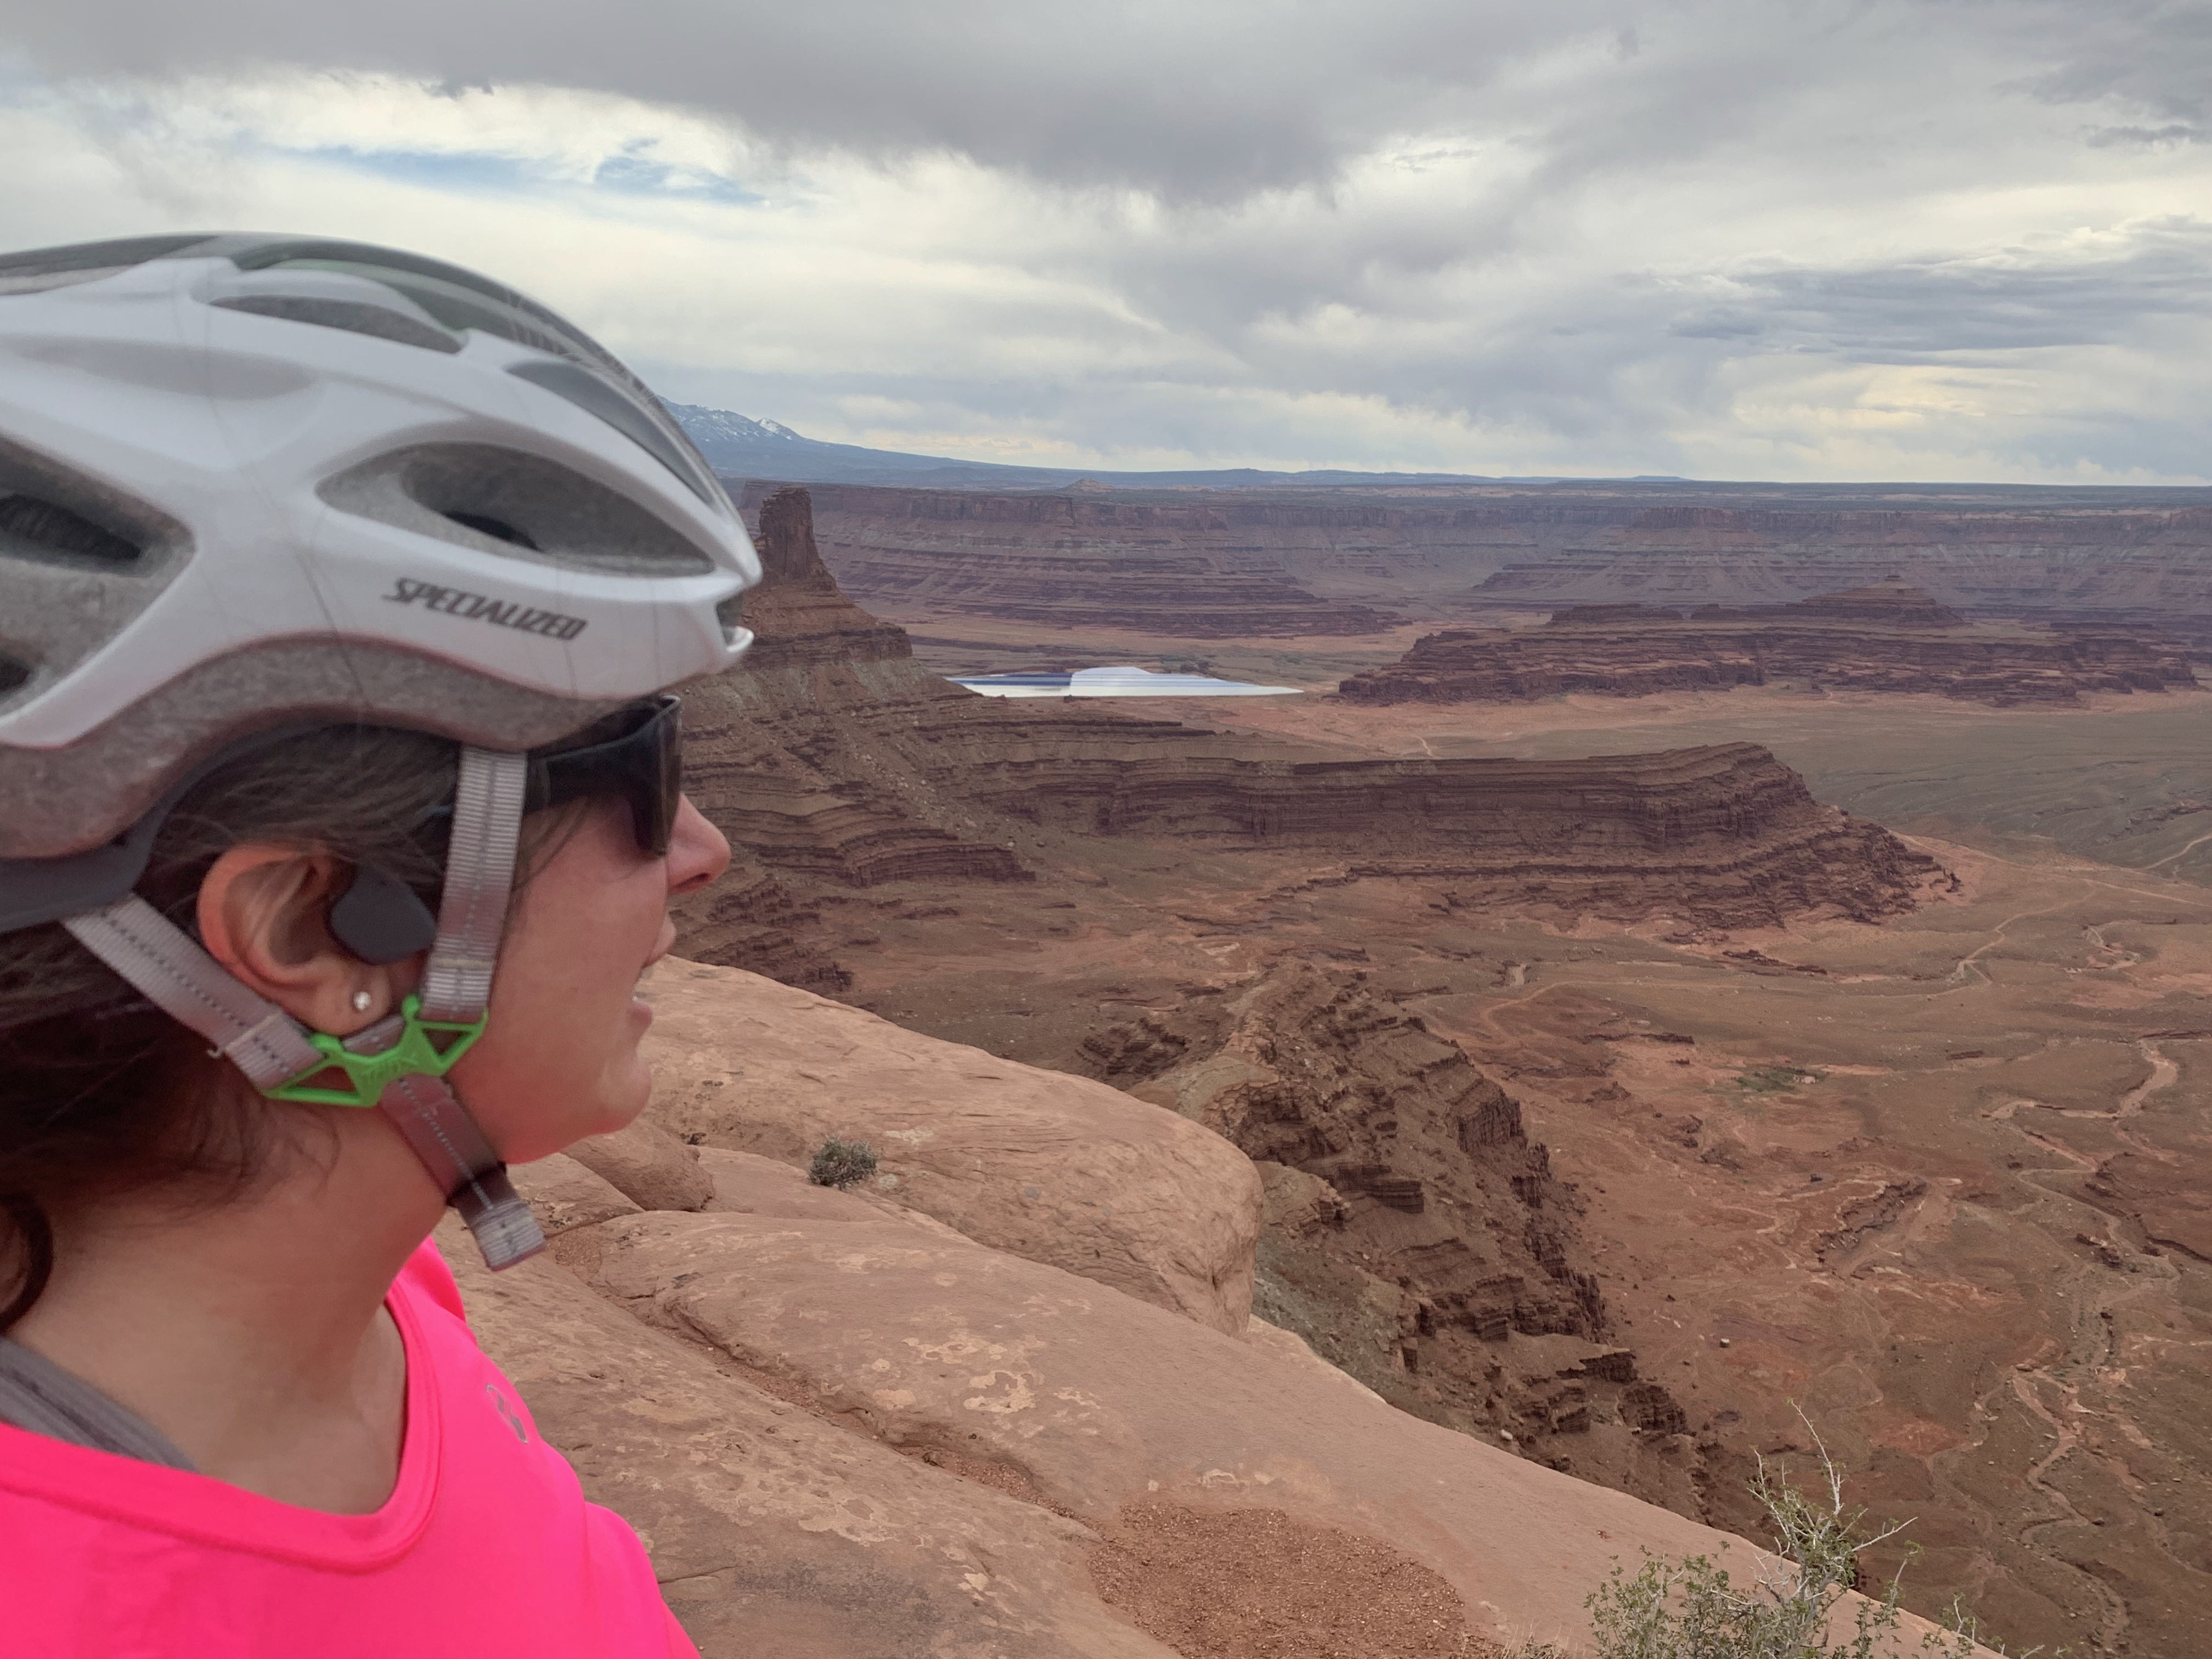 Trekz Air in use at Dead Horse Point trail system